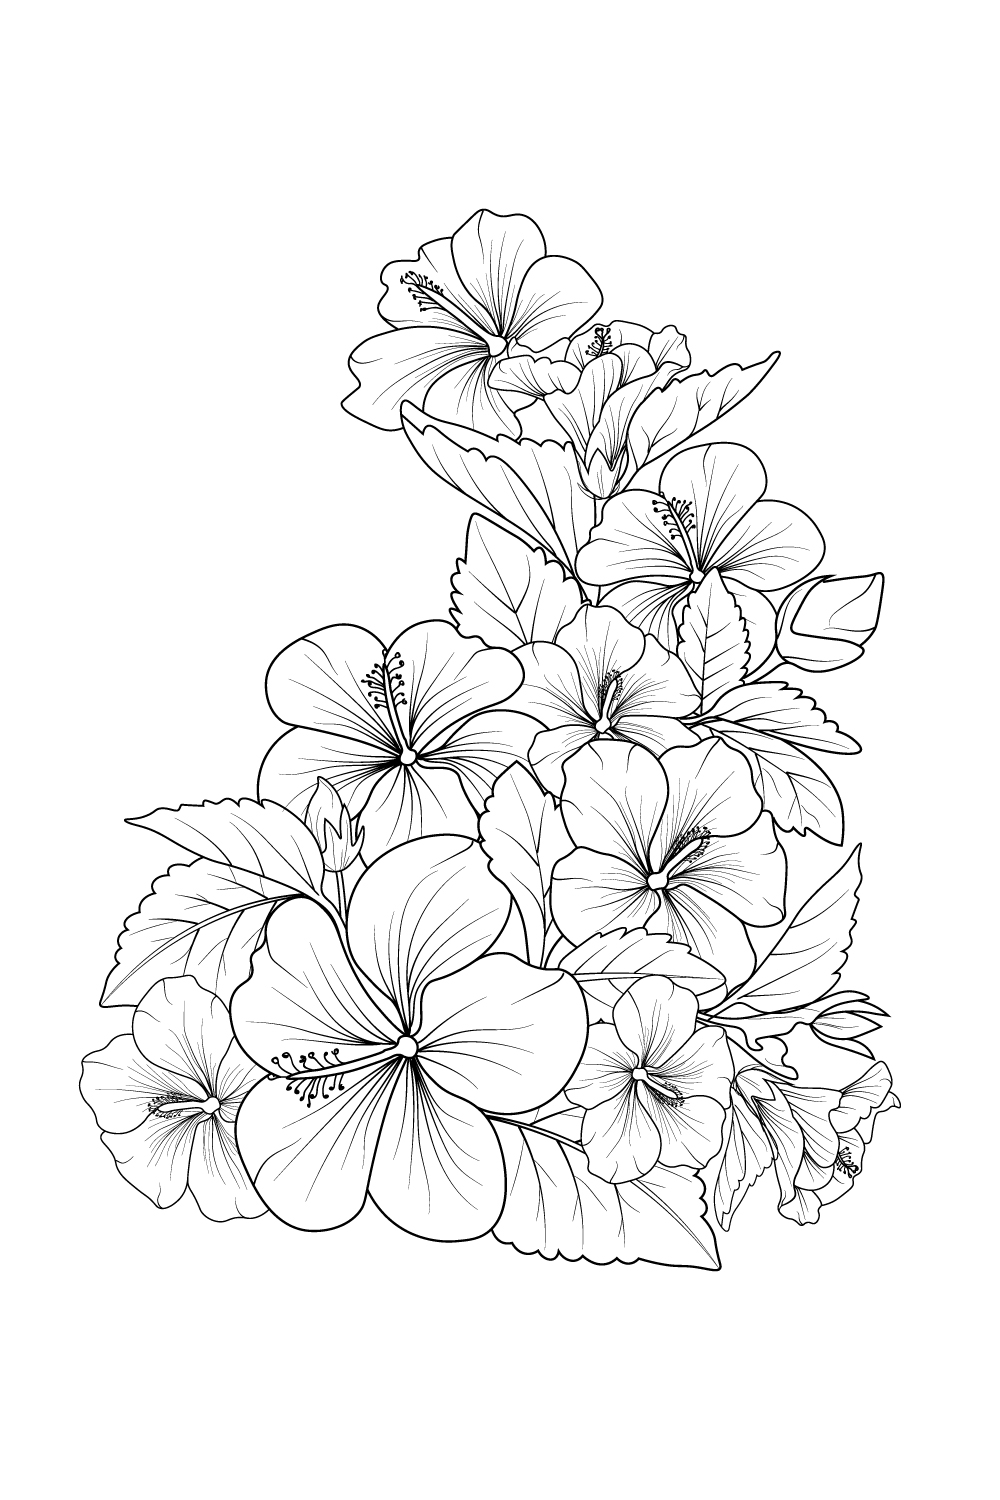 Hibiscus flowers illustration coloring page simplicity embellishment monochrome rose vector art